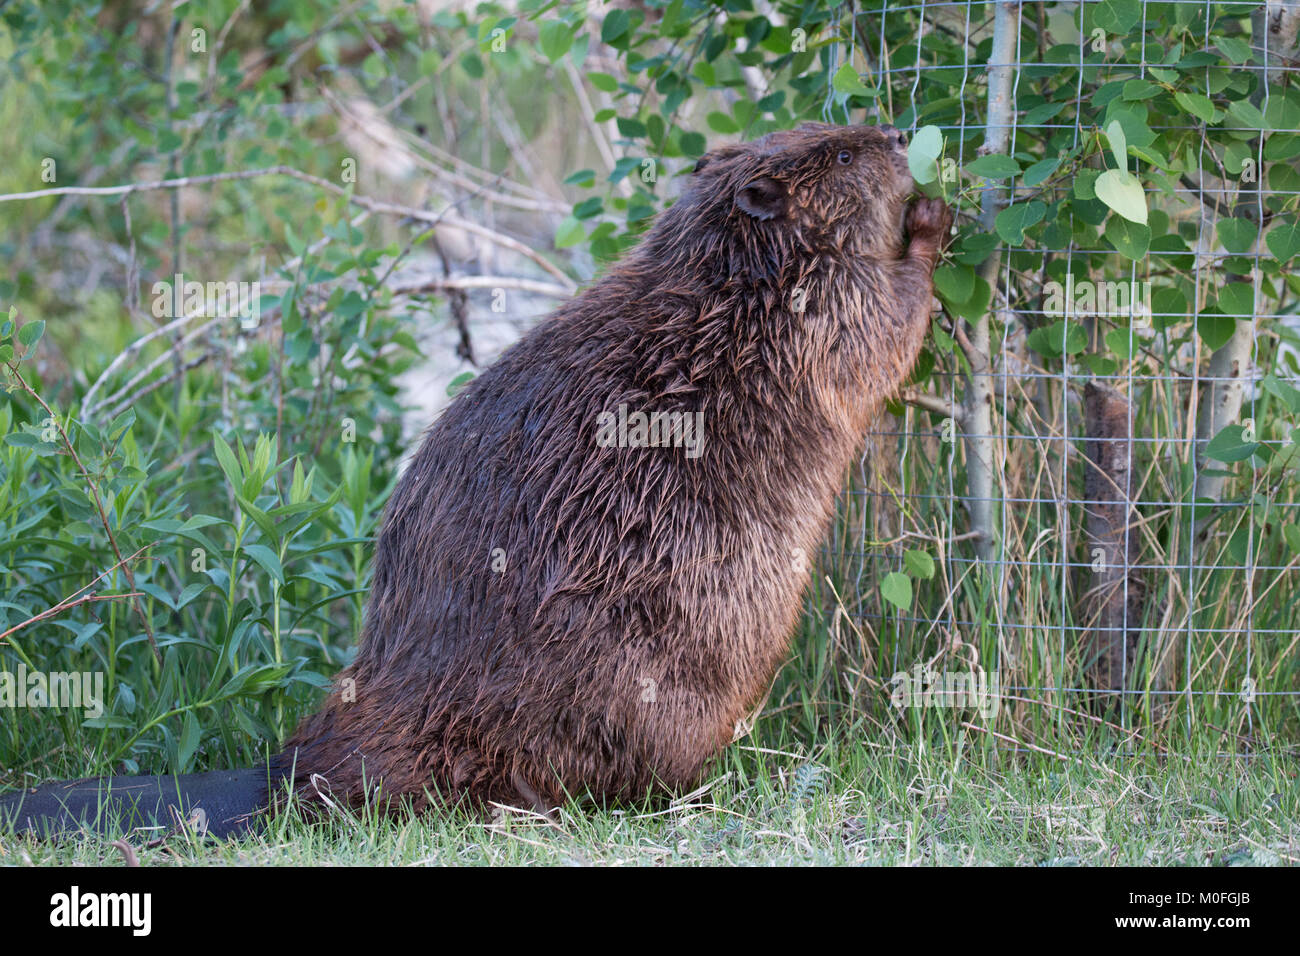 Beaver eating Trembling Aspen leaves, standing on hind legs to reach foliage from trees wrapped in beaver wire. Castor canadensis, Populus tremuloides Stock Photo